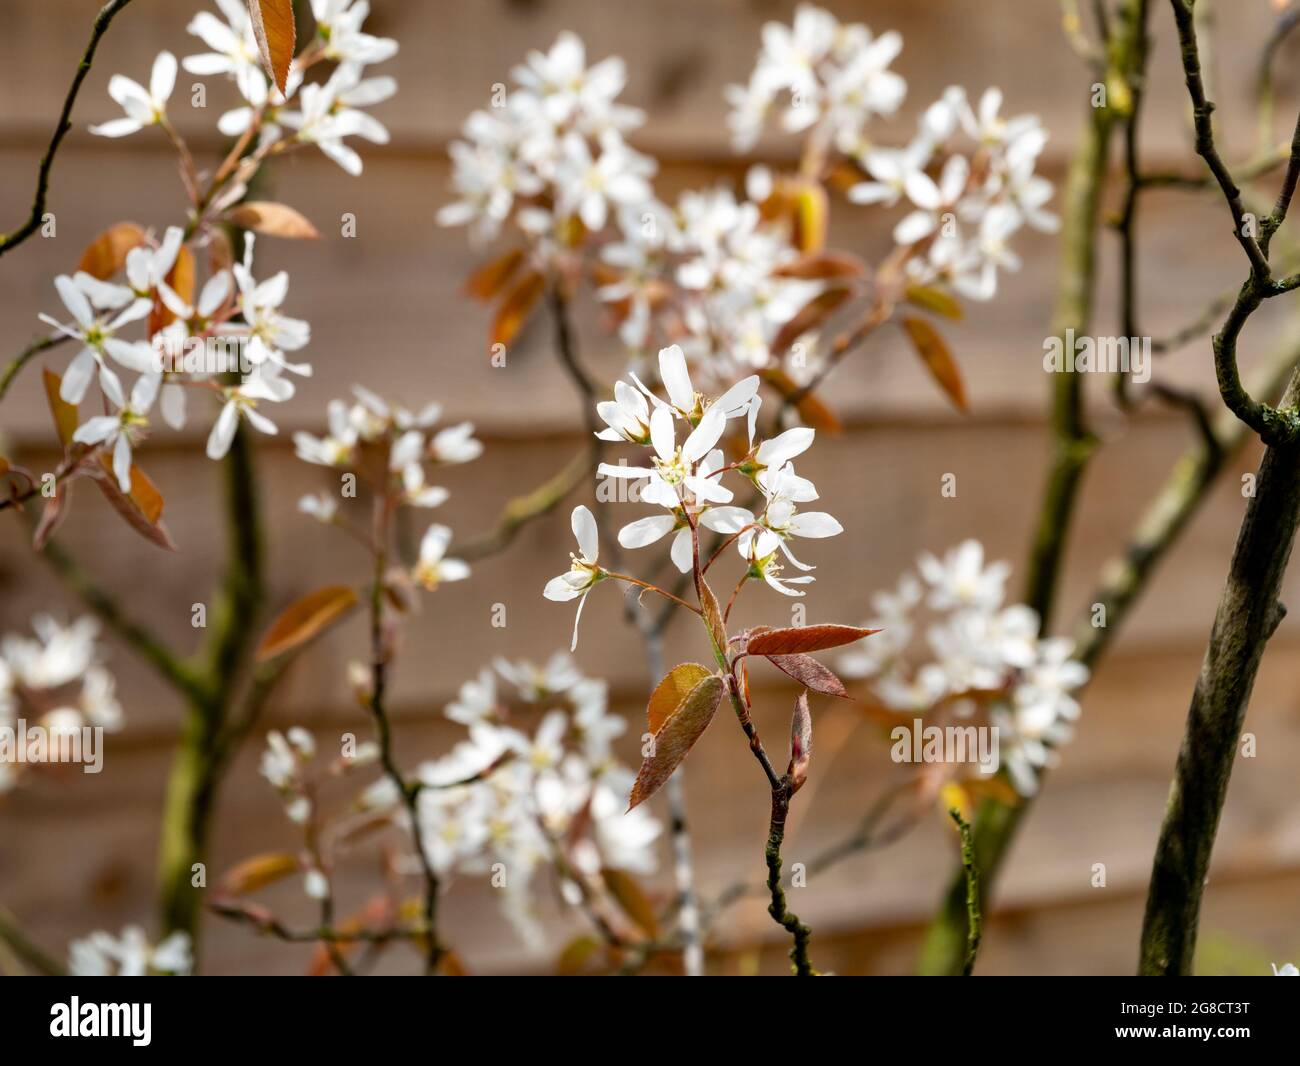 Juneberry or snowy mespilus, Amelanchier lamarkii, reddish brown leaves and white flowers in spring, Netherlands Stock Photo